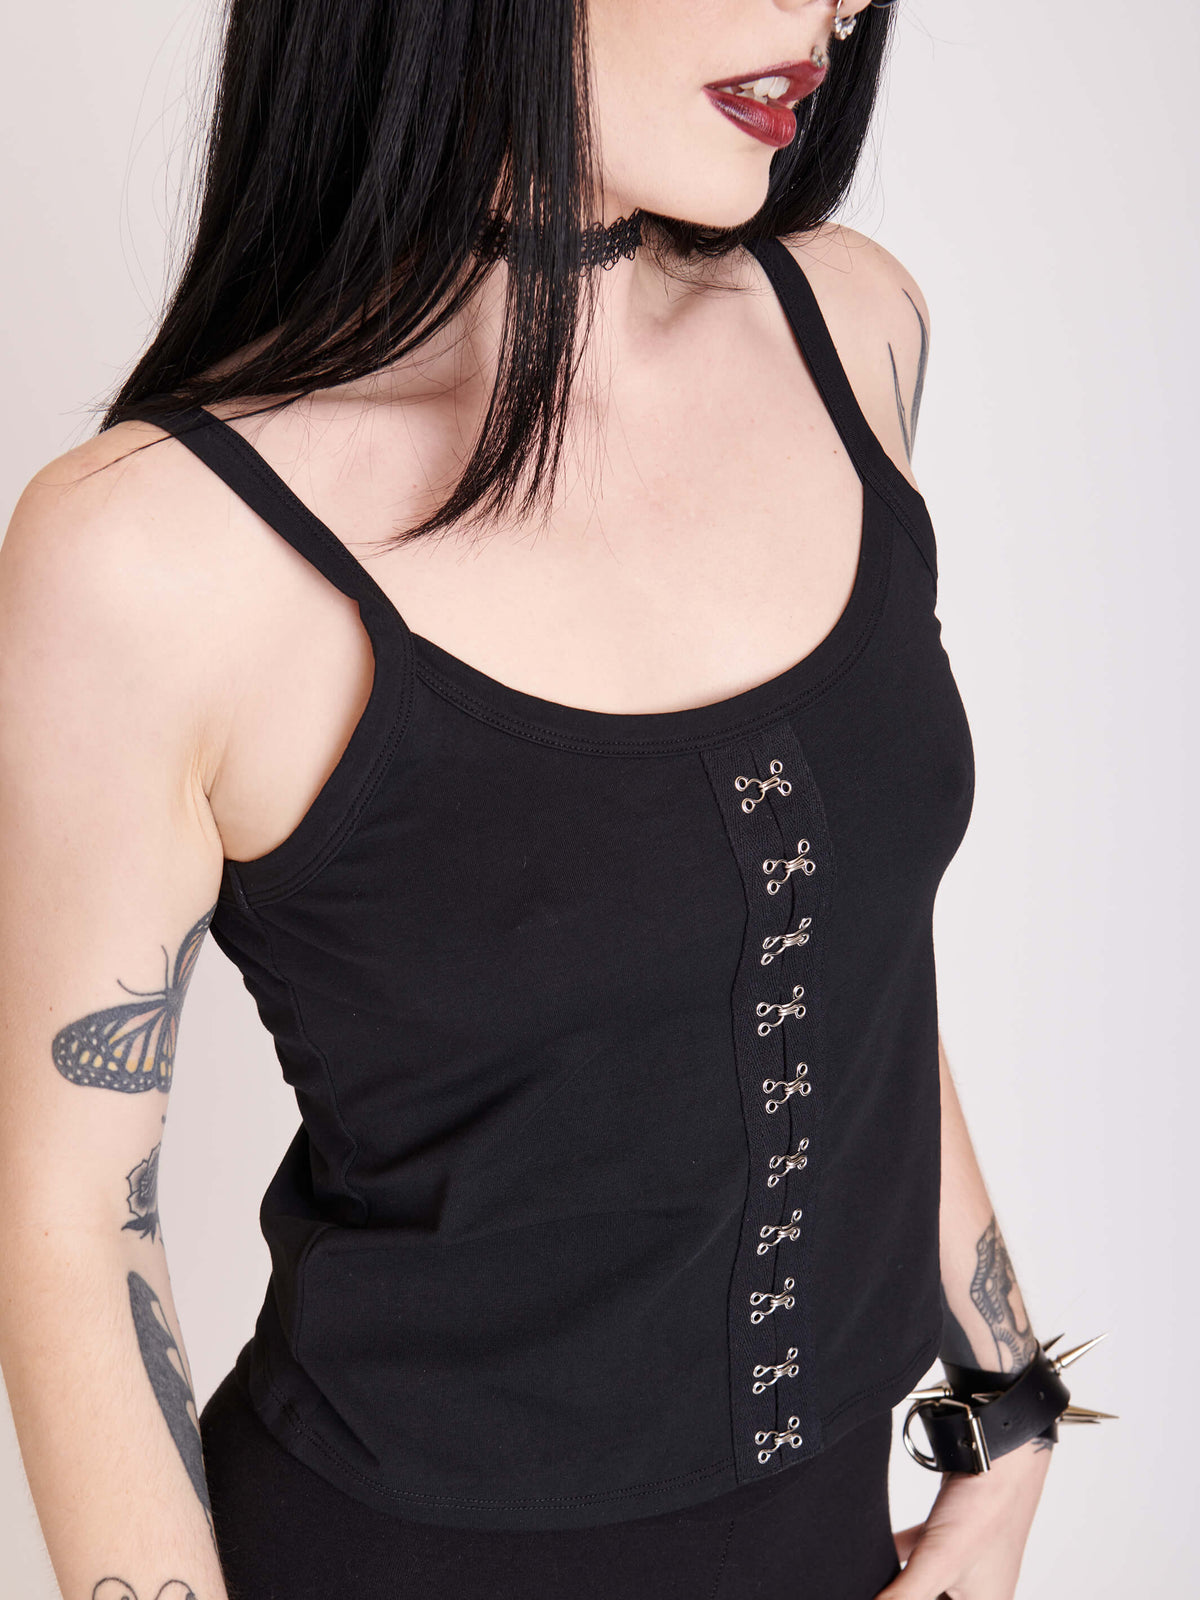 Black cami with hook and eye detail down center front